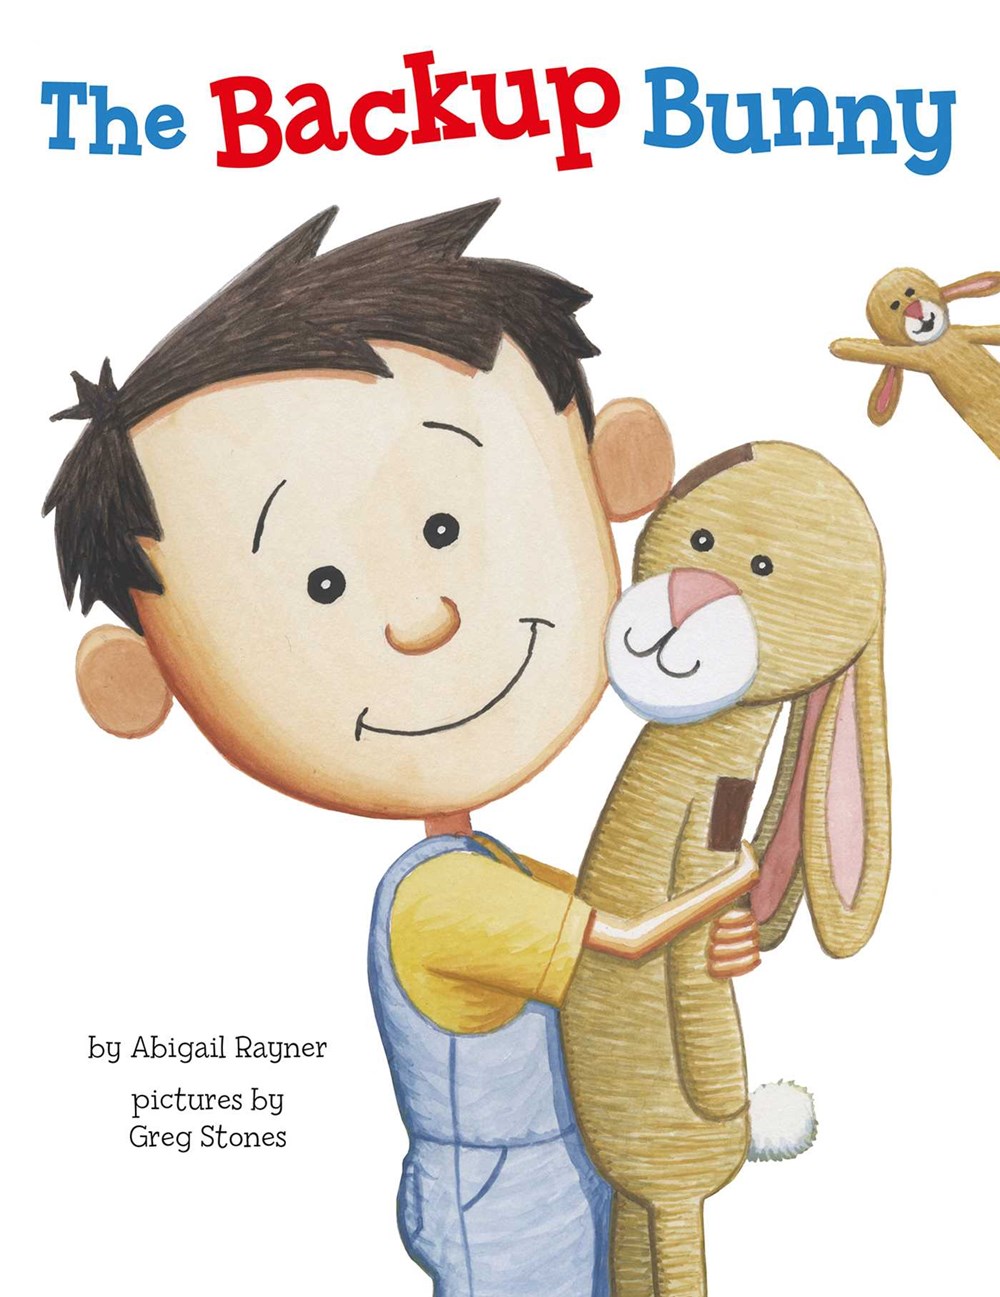 Sunday Story Time with Abigail Rayner (Author of The Backup Bunny)